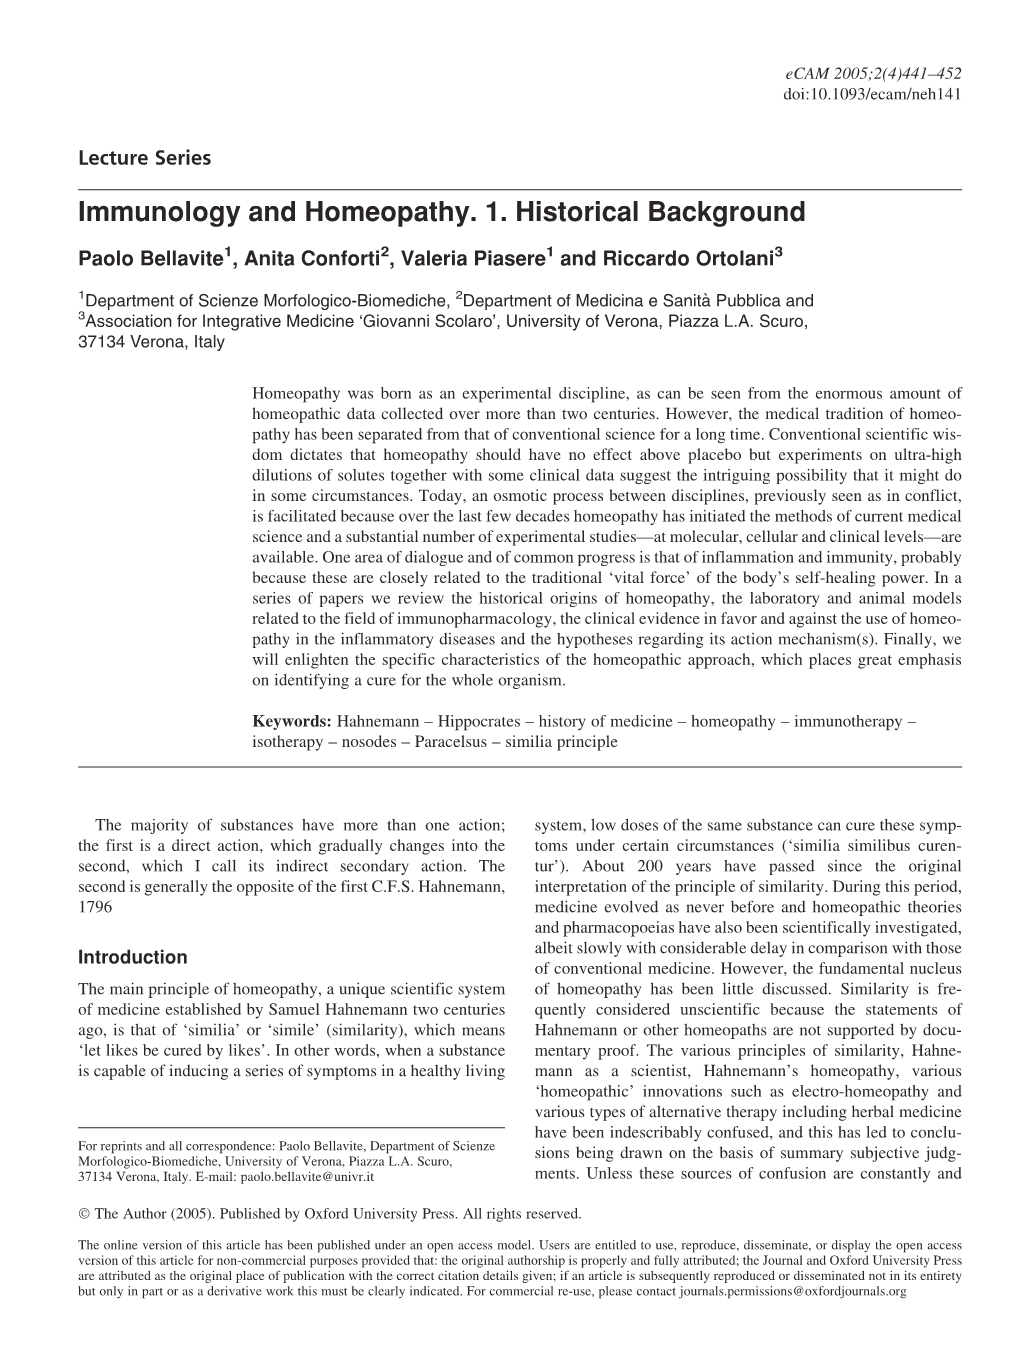 Immunology and Homeopathy. 1. Historical Background